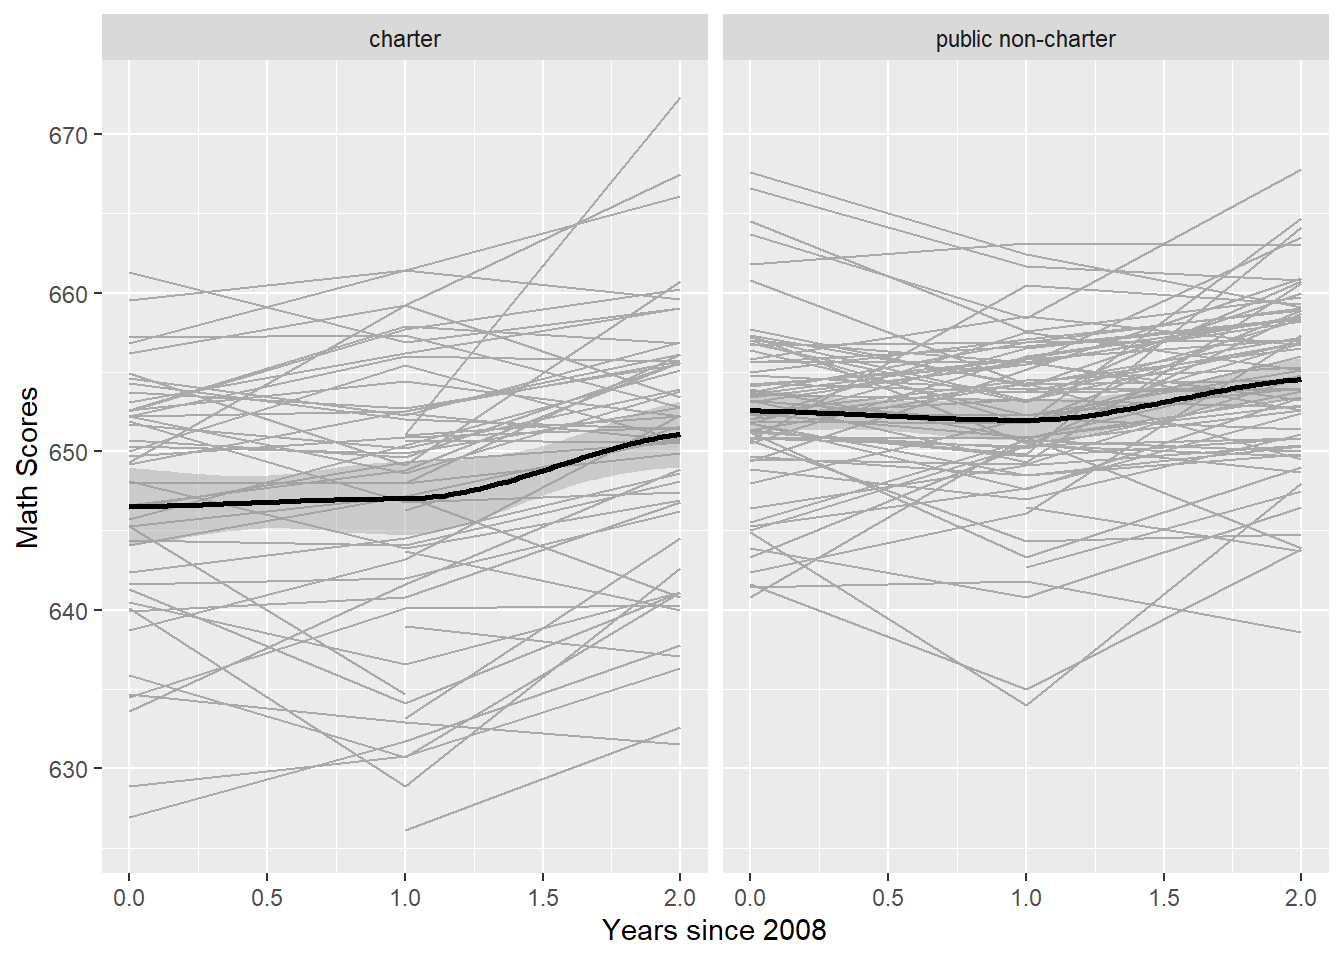 Spaghetti plots showing time trends for each school by school type, for a random sample of charter schools (left) and public non-charter schools (right), with overall fits using loess (bold).